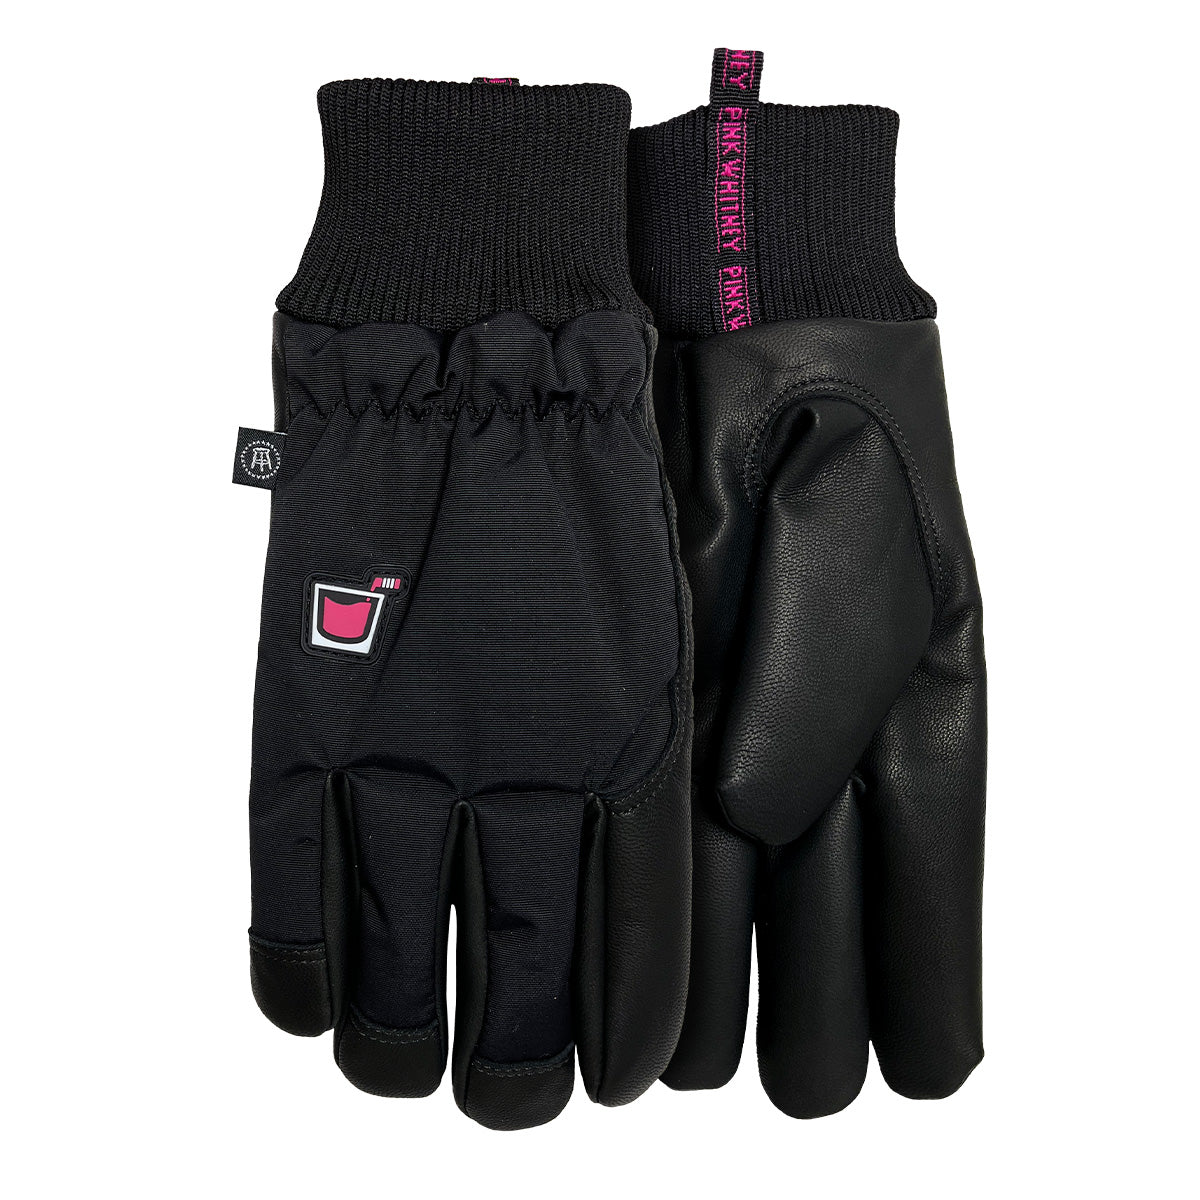 Watson Gloves x Pink Whitney Outdoor Rink Winter Gloves-Winter Accessories-Pink Whitney-Black-S-Barstool Sports